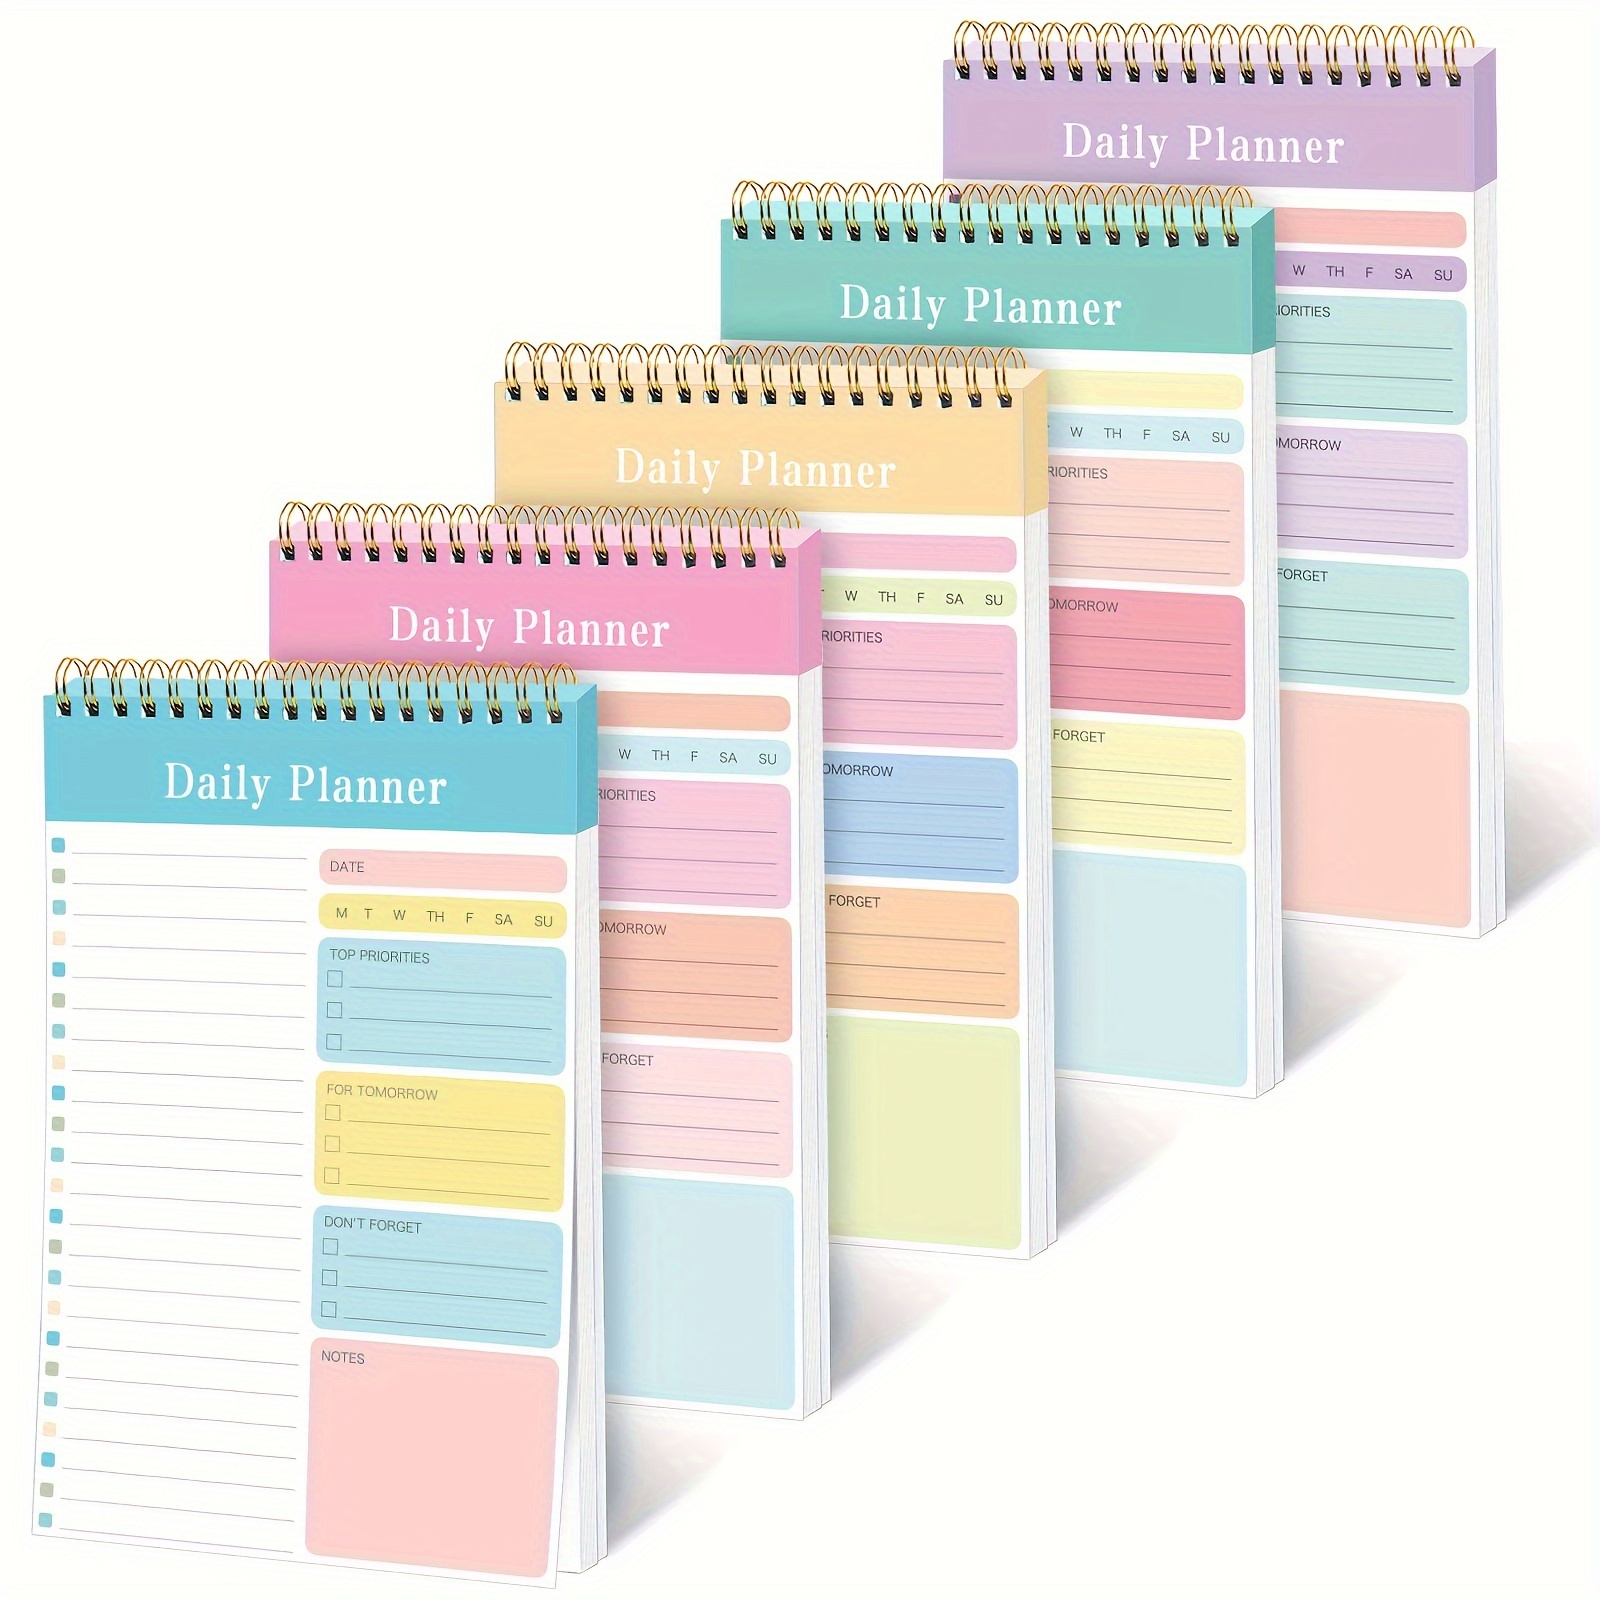 

5 Pack Daily Planner Spiral Notebook - A5 Size With Clear Cover, Double Coil Binding, To Do List Notepad 30 Sheets, Top Priorities, Schedule, Notes Section For Office, Workout, Academic Planning